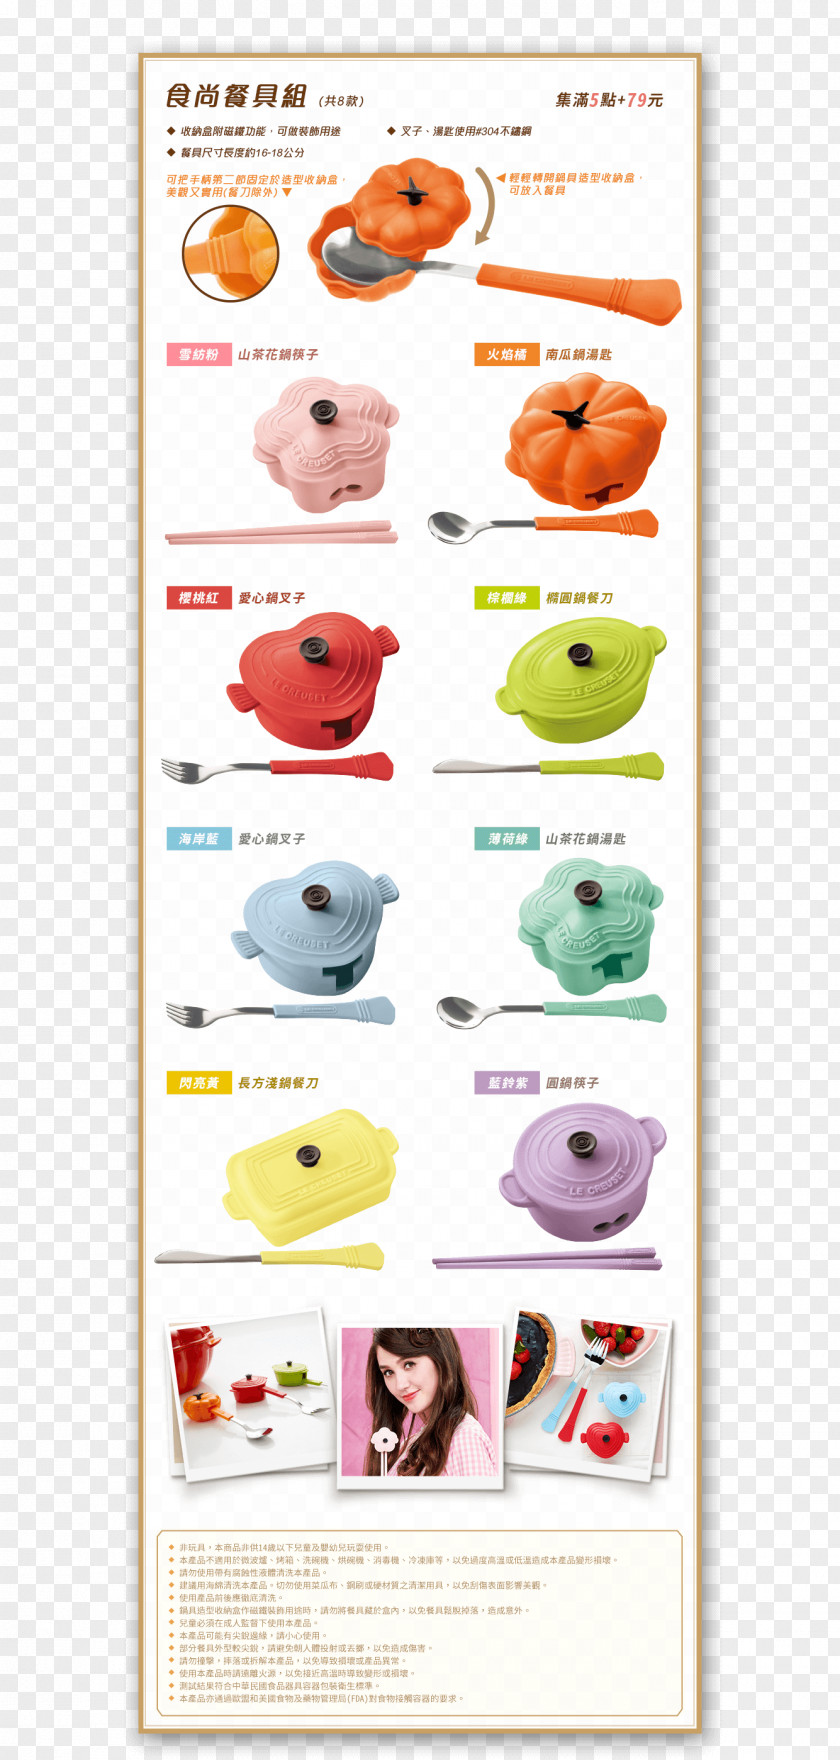 7-11 LE CREUSET TAIWAN 忠孝門市 Cutlery 7-Eleven PNG